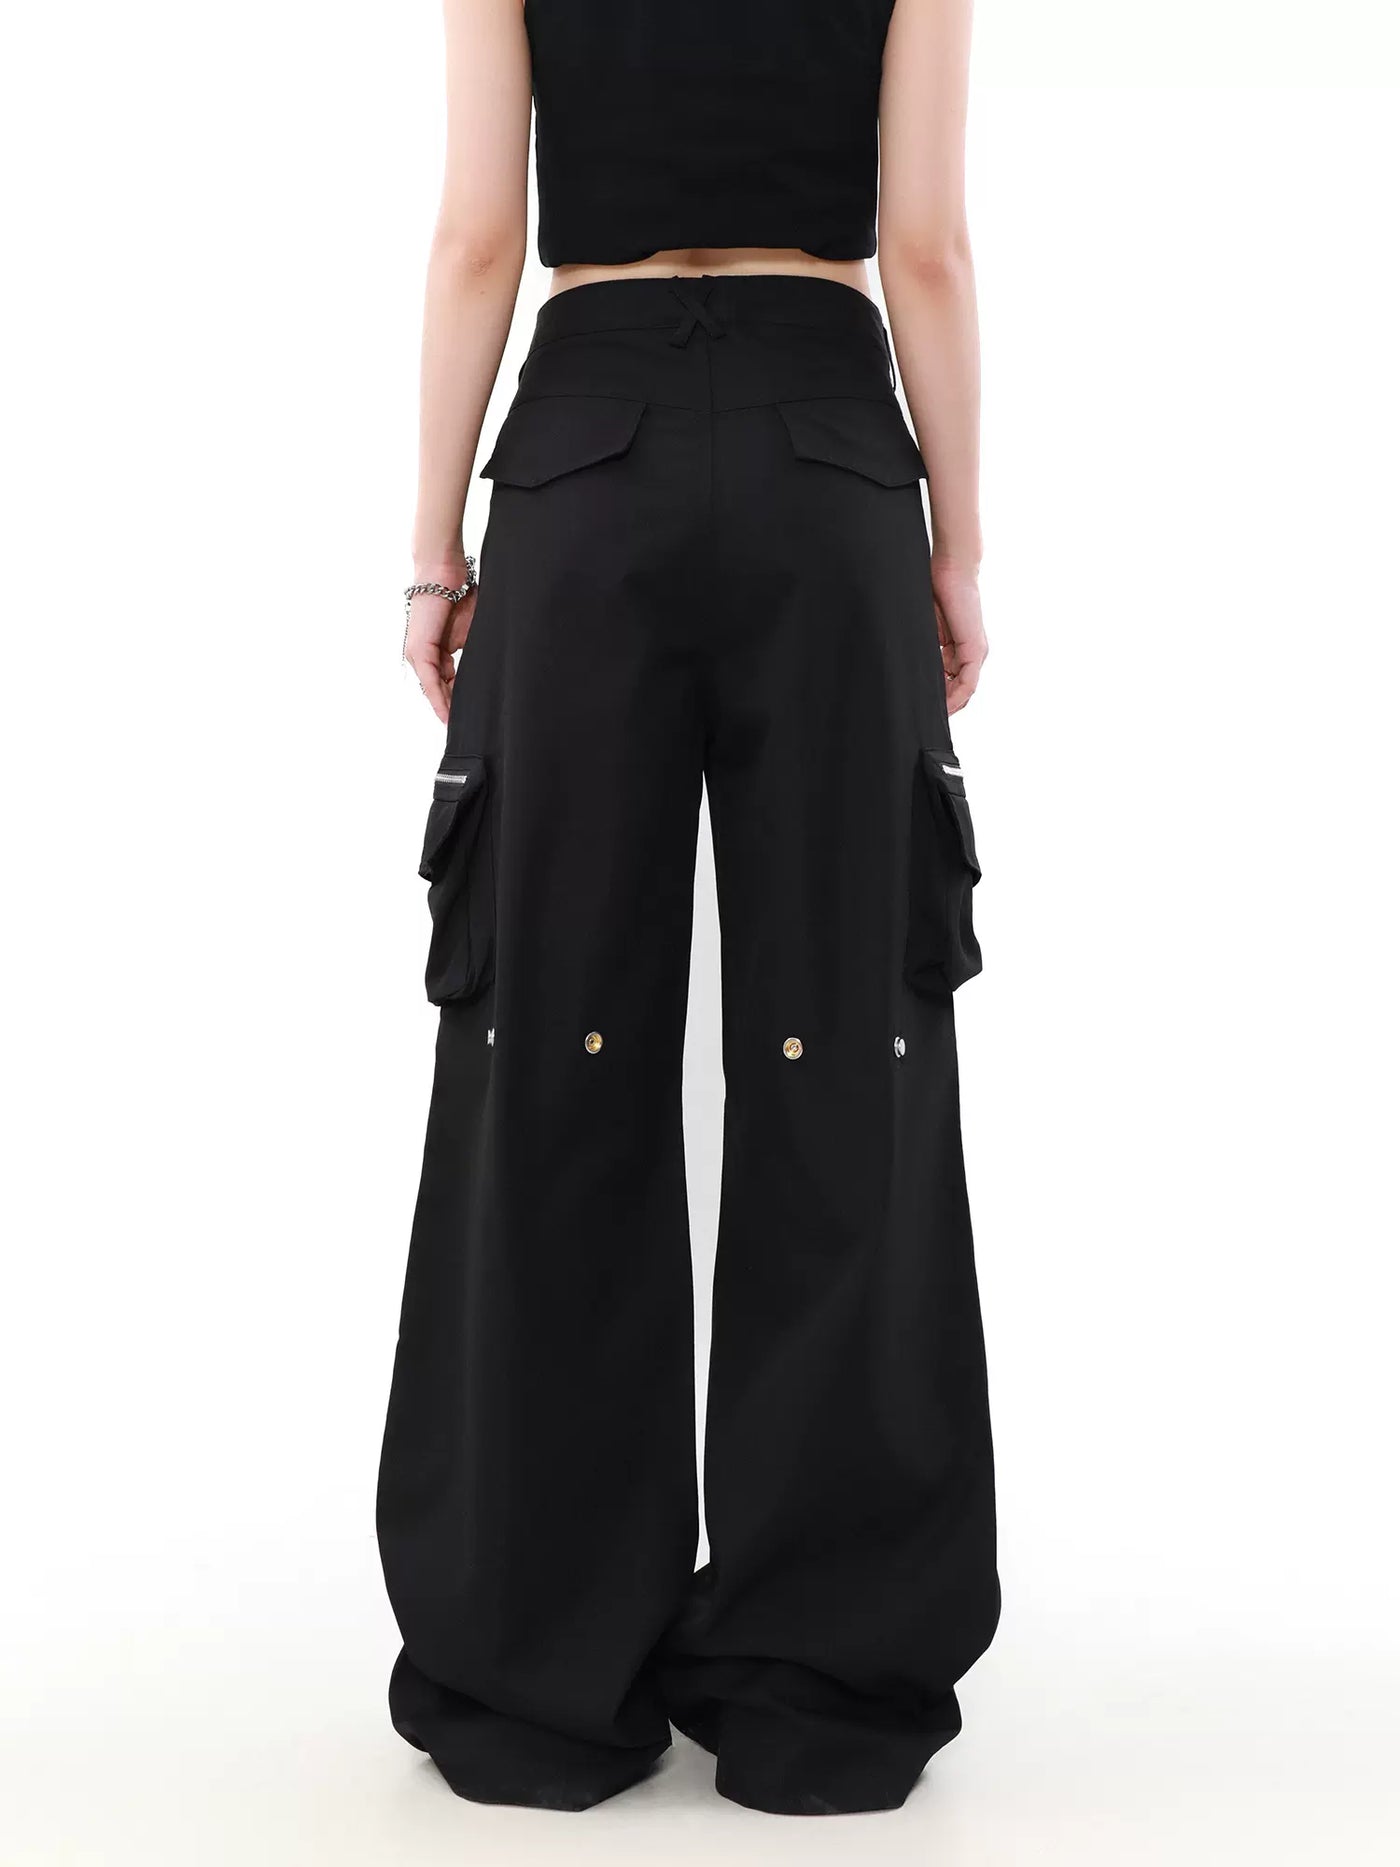 Cinched Back Detail Pants Korean Street Fashion Pants By Mr Nearly Shop Online at OH Vault